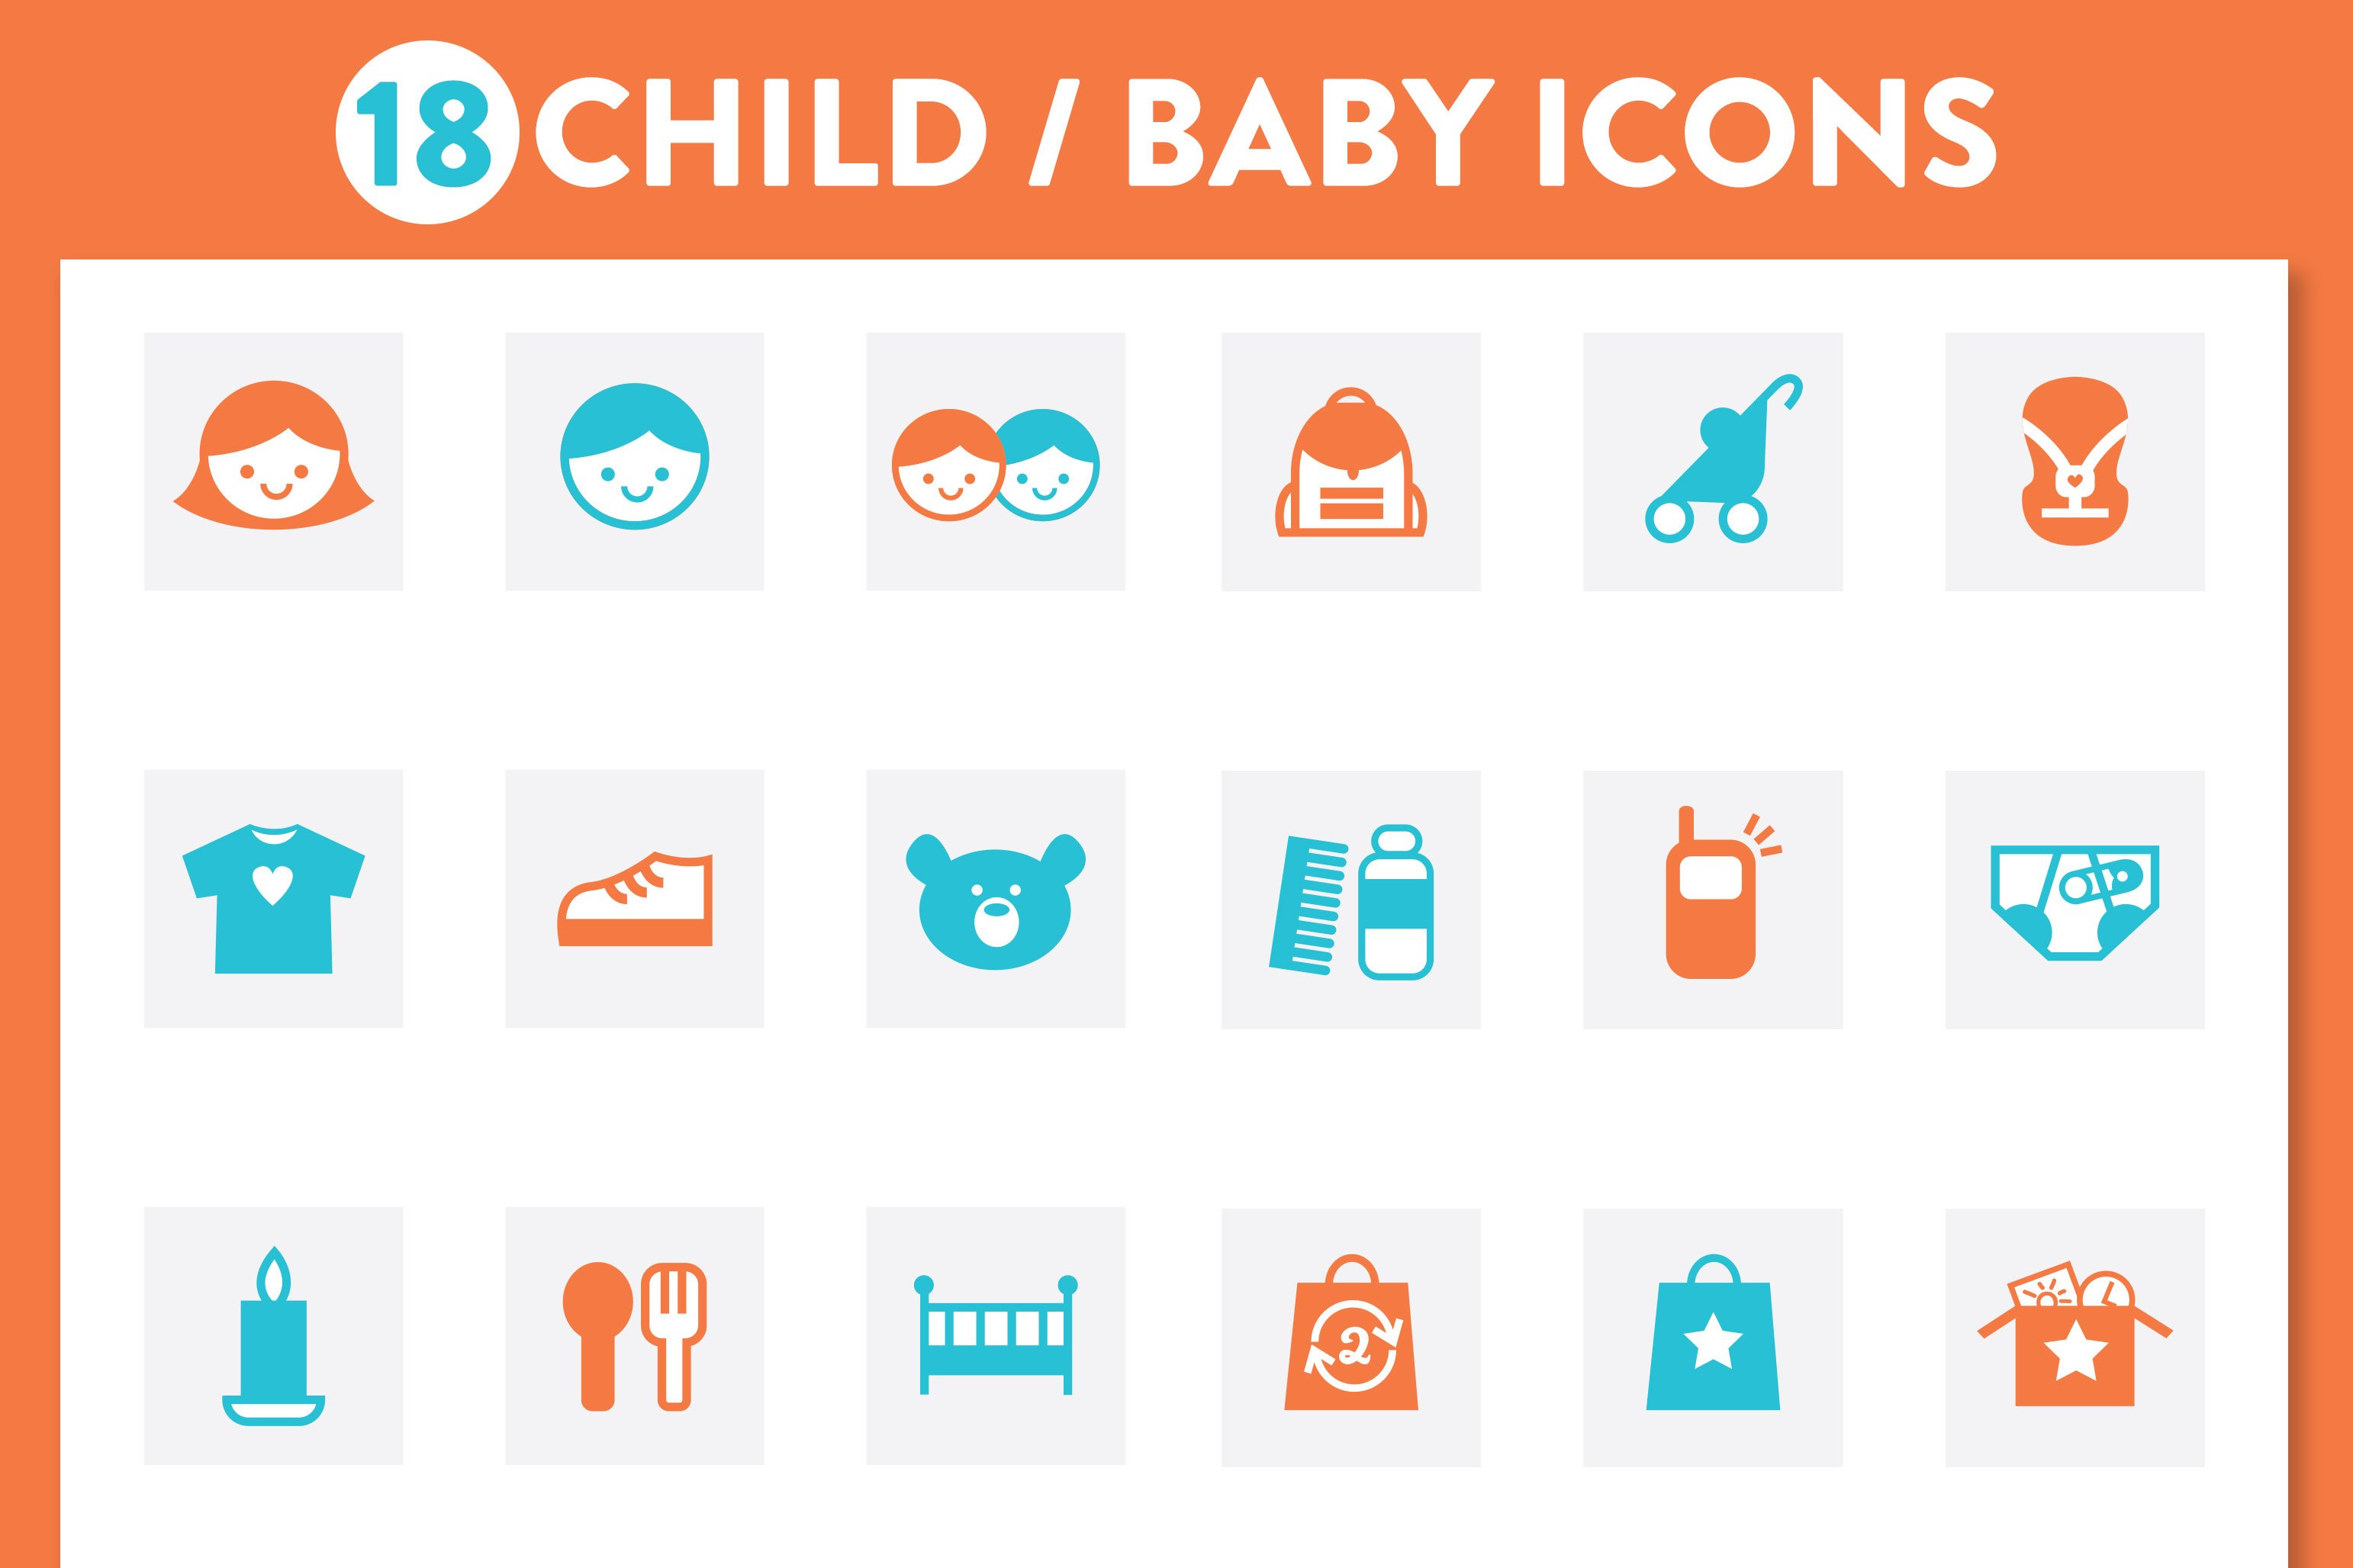 BABY CHILD KIDS ICON SET cover image.